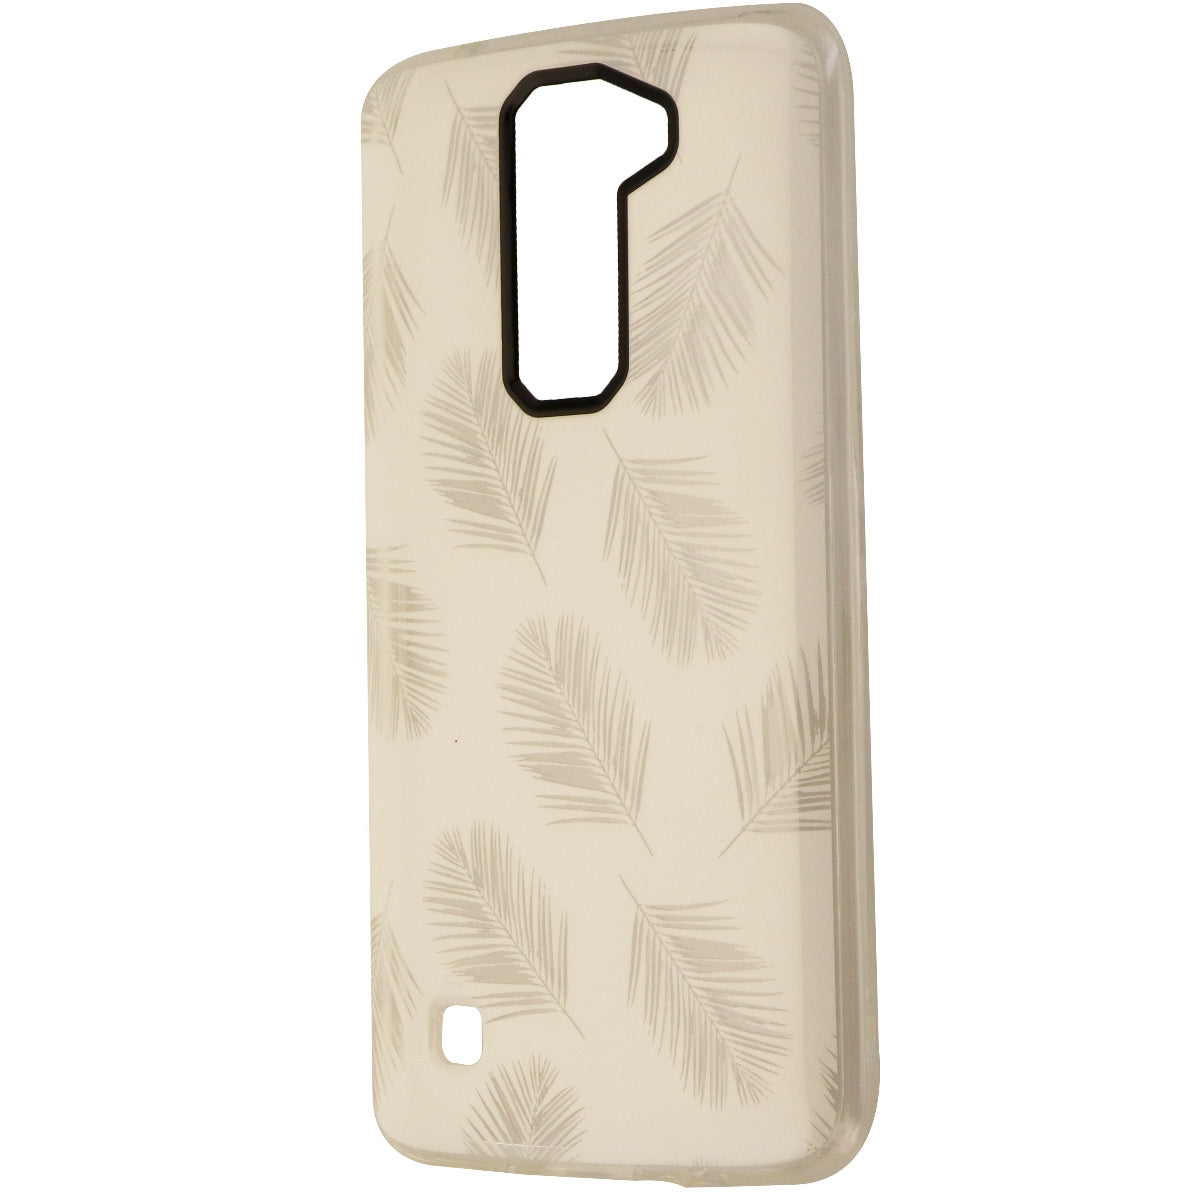 Incipio Design Series Hybrid Hard Case Cover for LG K7 - White/Gold Palm Leaves Cell Phone - Cases, Covers & Skins Incipio    - Simple Cell Bulk Wholesale Pricing - USA Seller